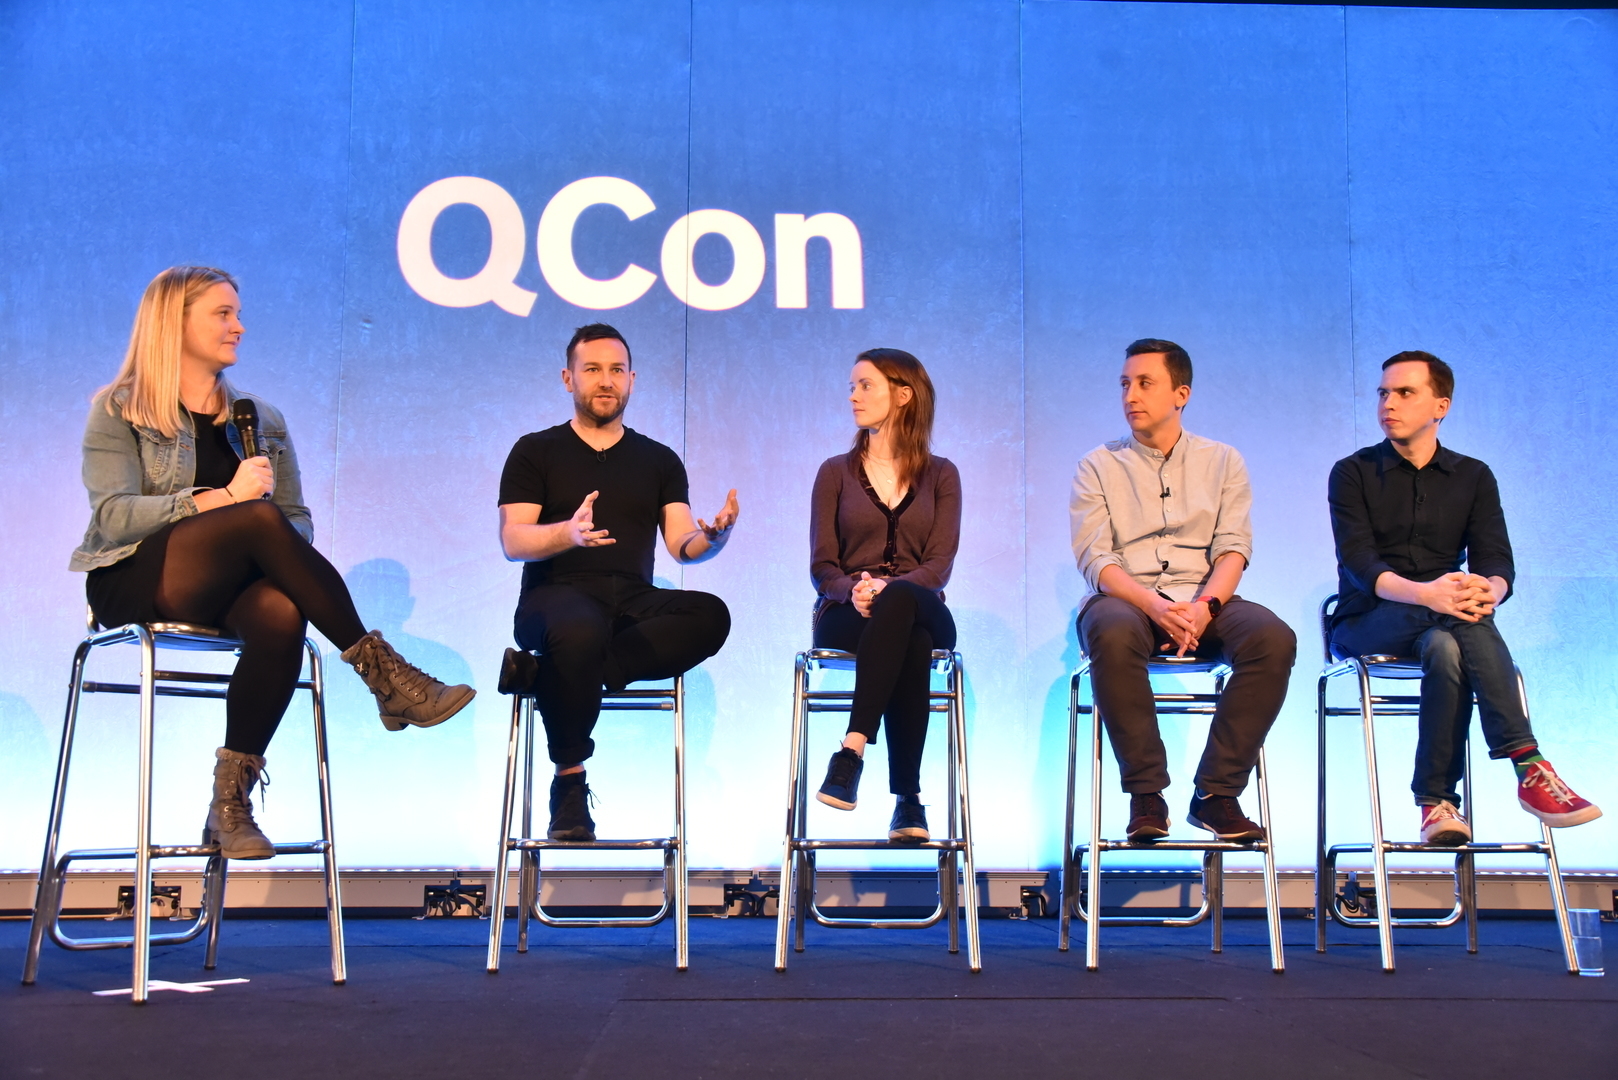 QCon London International Software Development Conference, March 27-29, 2023. In-person or online., London, England, United Kingdom